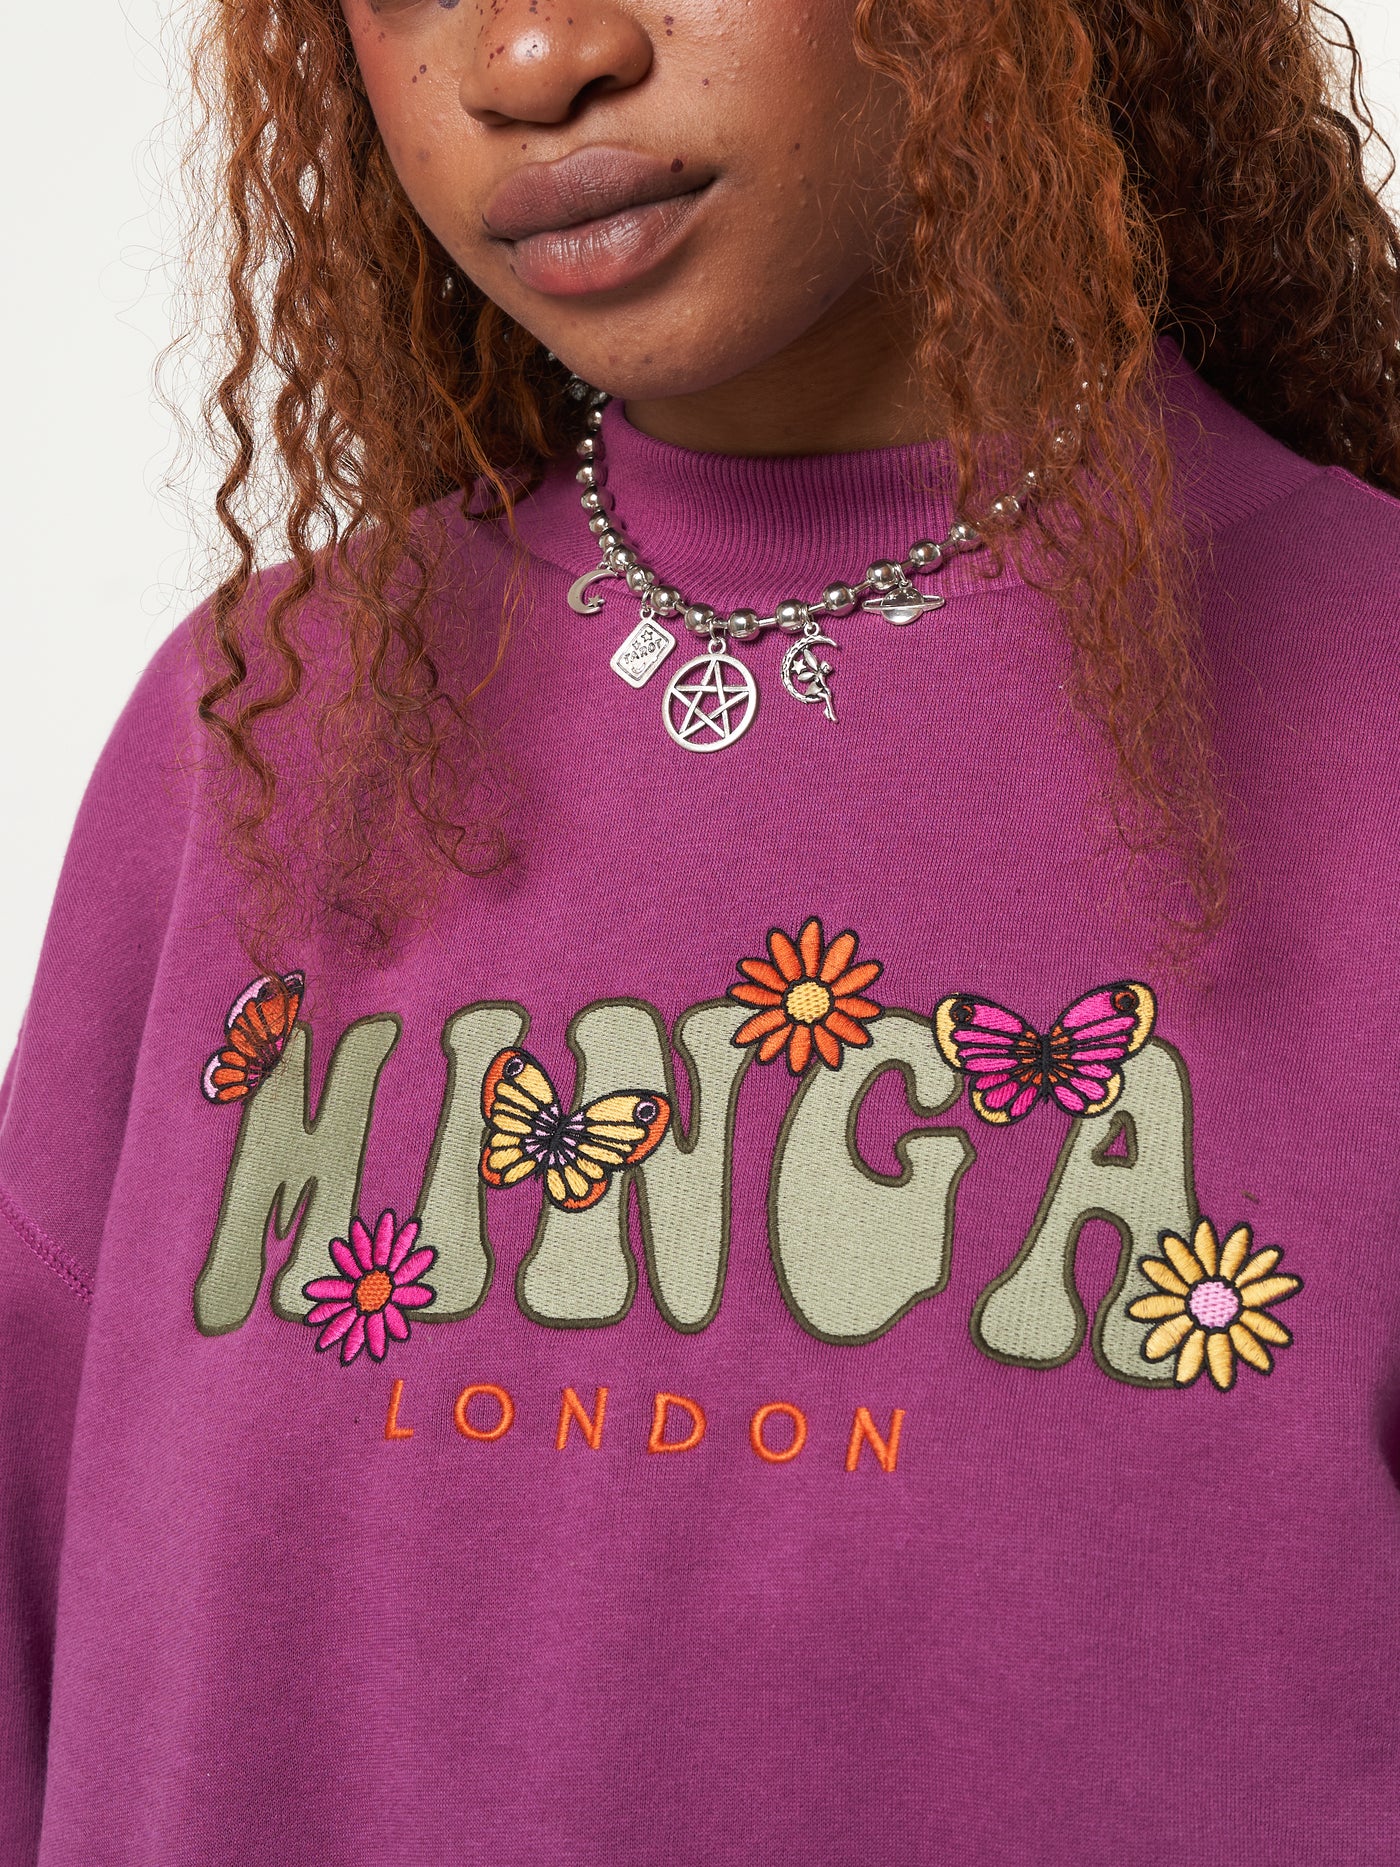 Oversized fit sweater in purple orchid with Minga London flowers and butterflies front embroidery